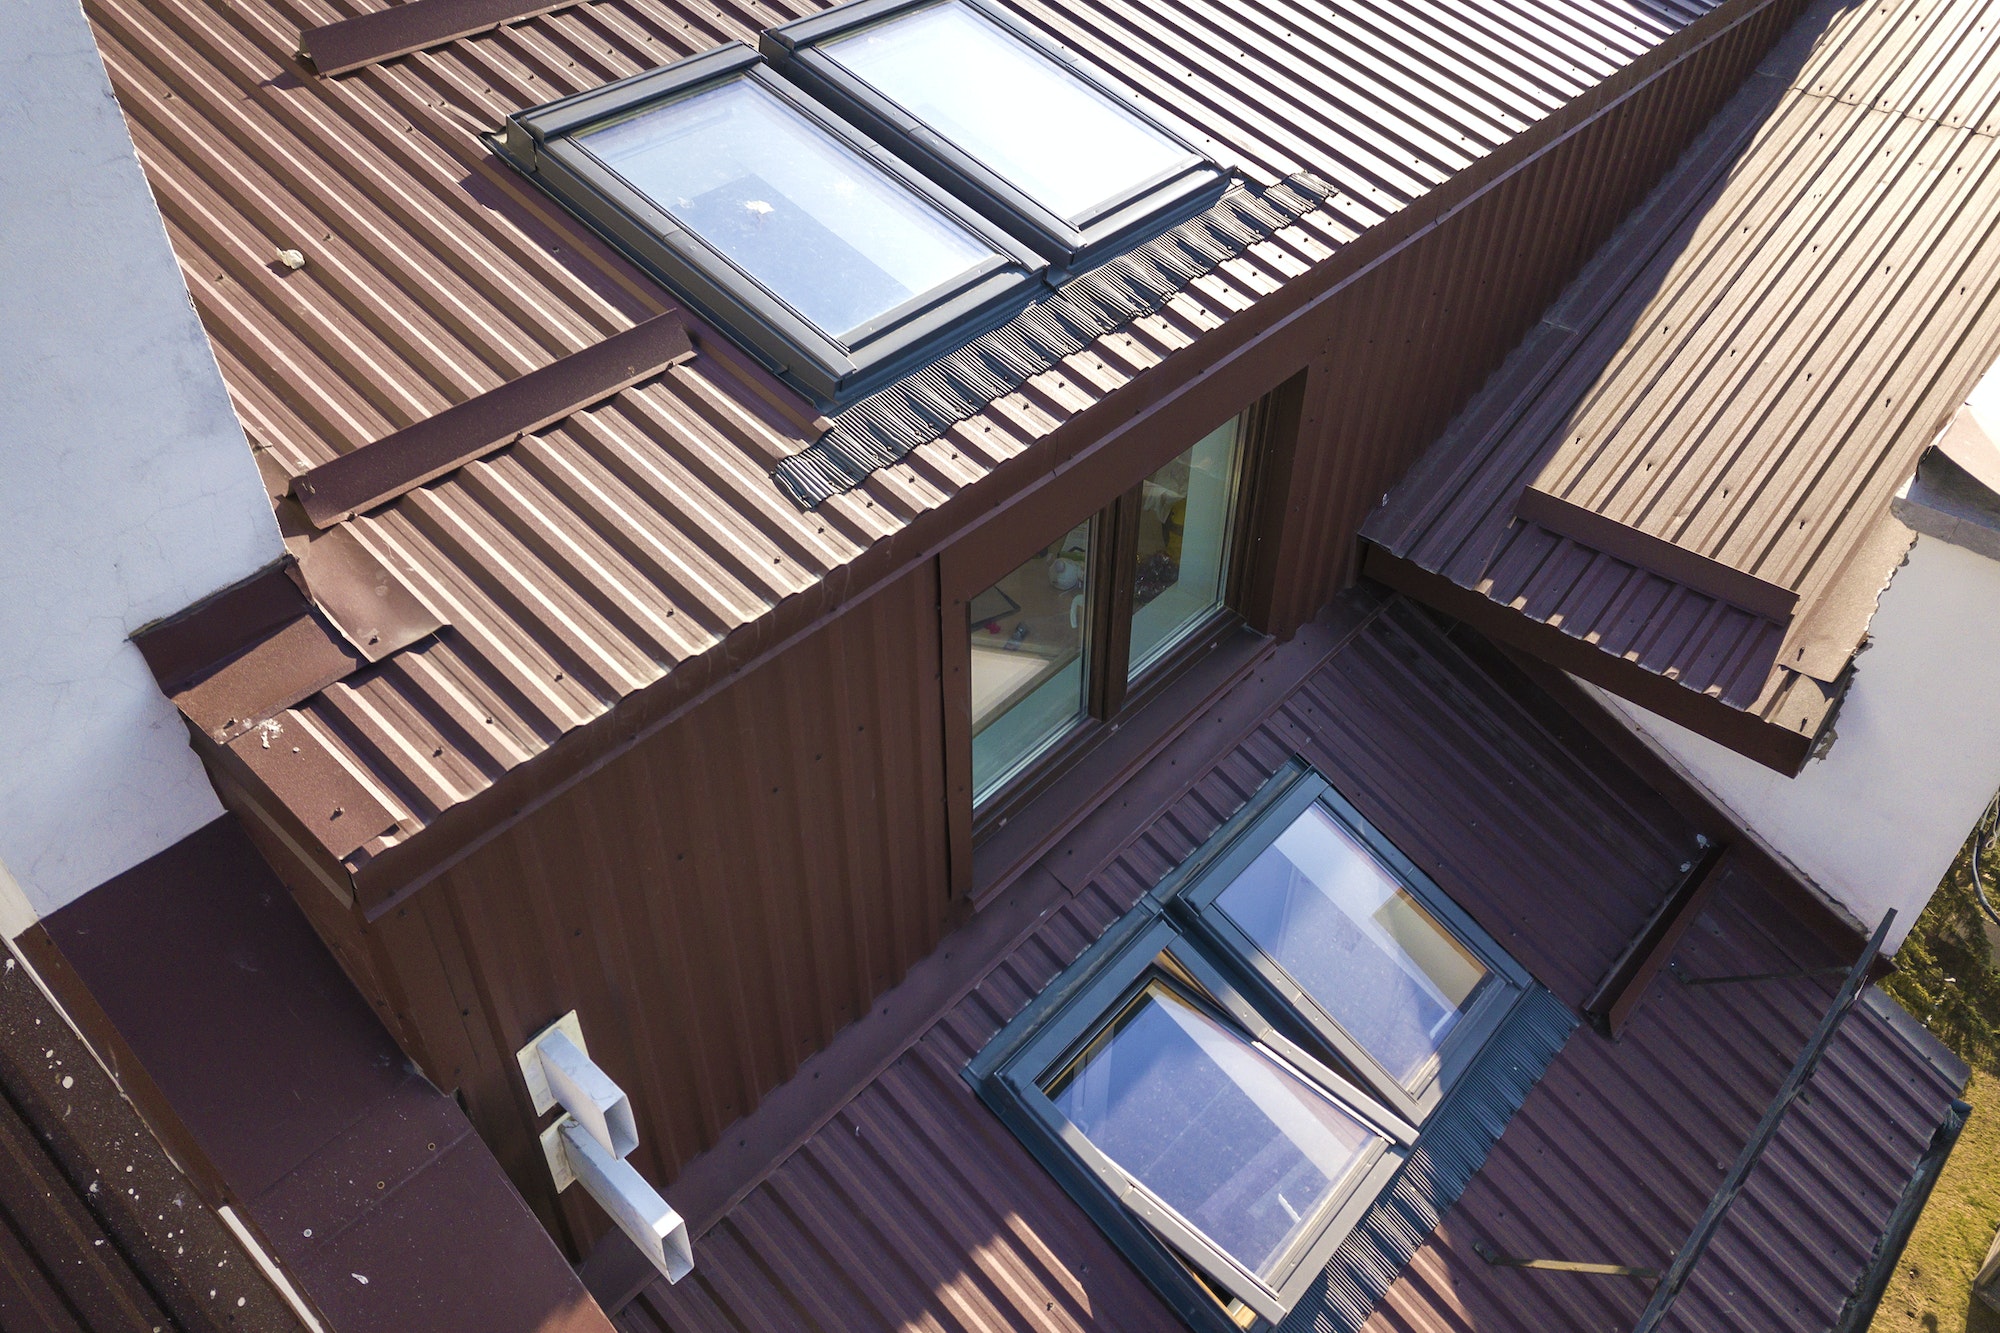 Aerial view of annex room exterior with plastic attic windows, roof and walls covered with brown